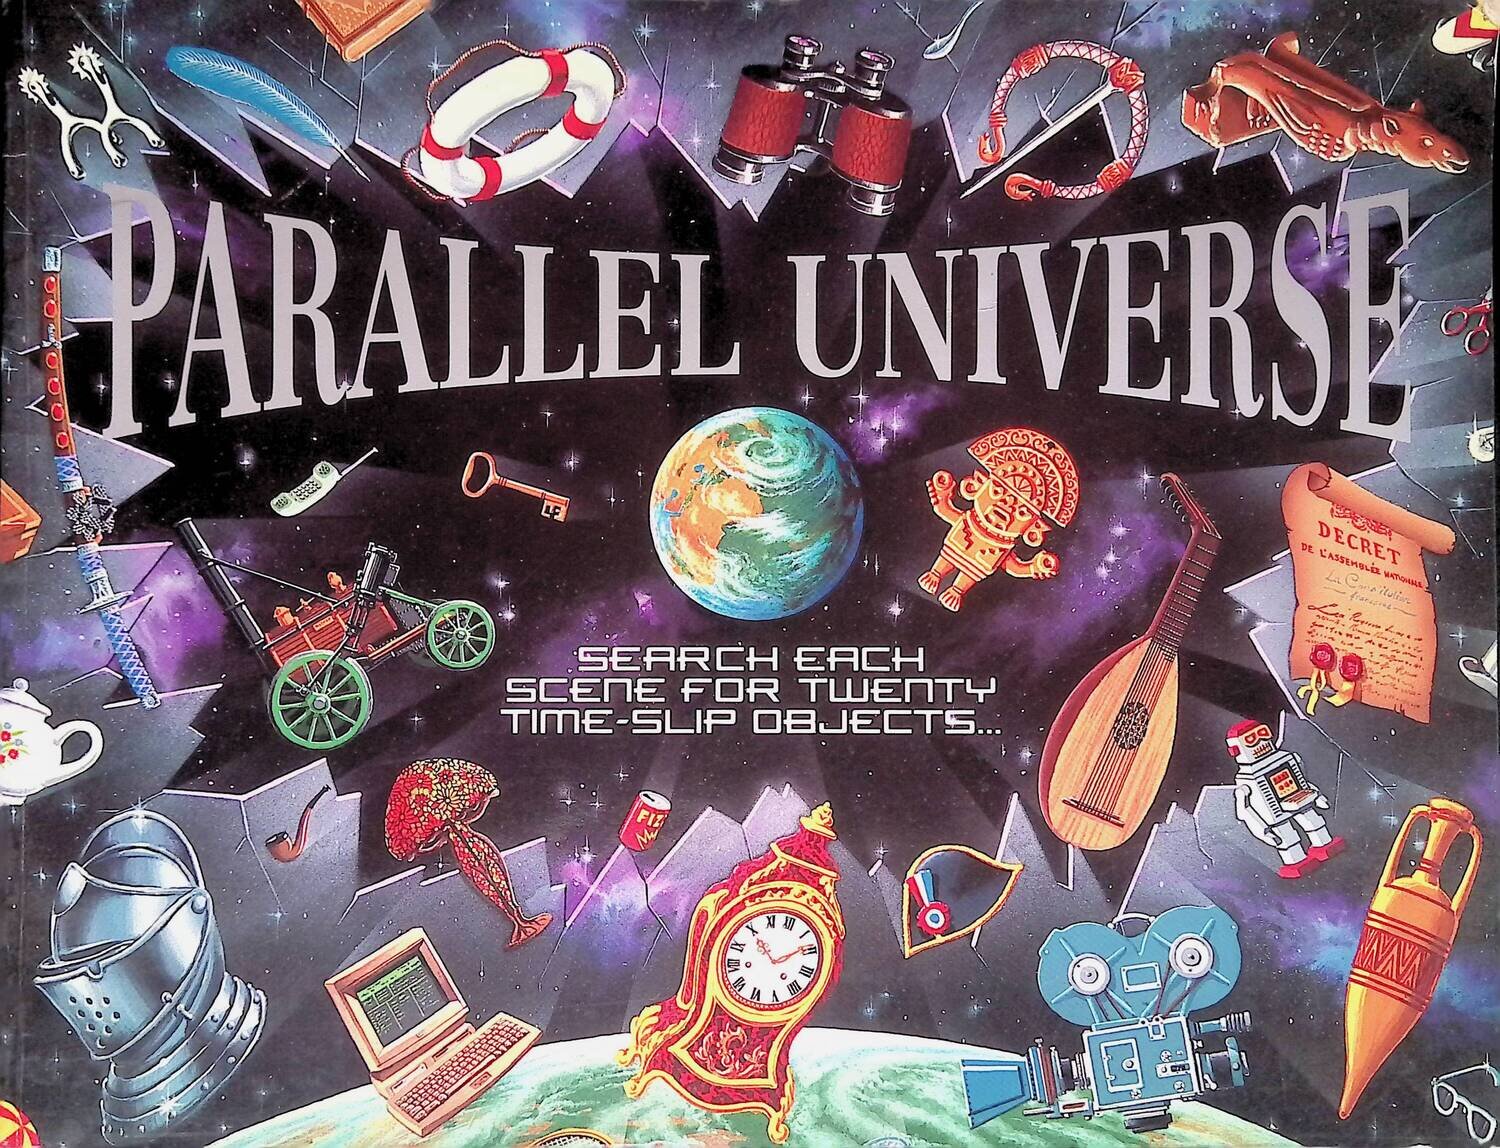 Parallel universe: an interactive time adventure; Baxter Nicola